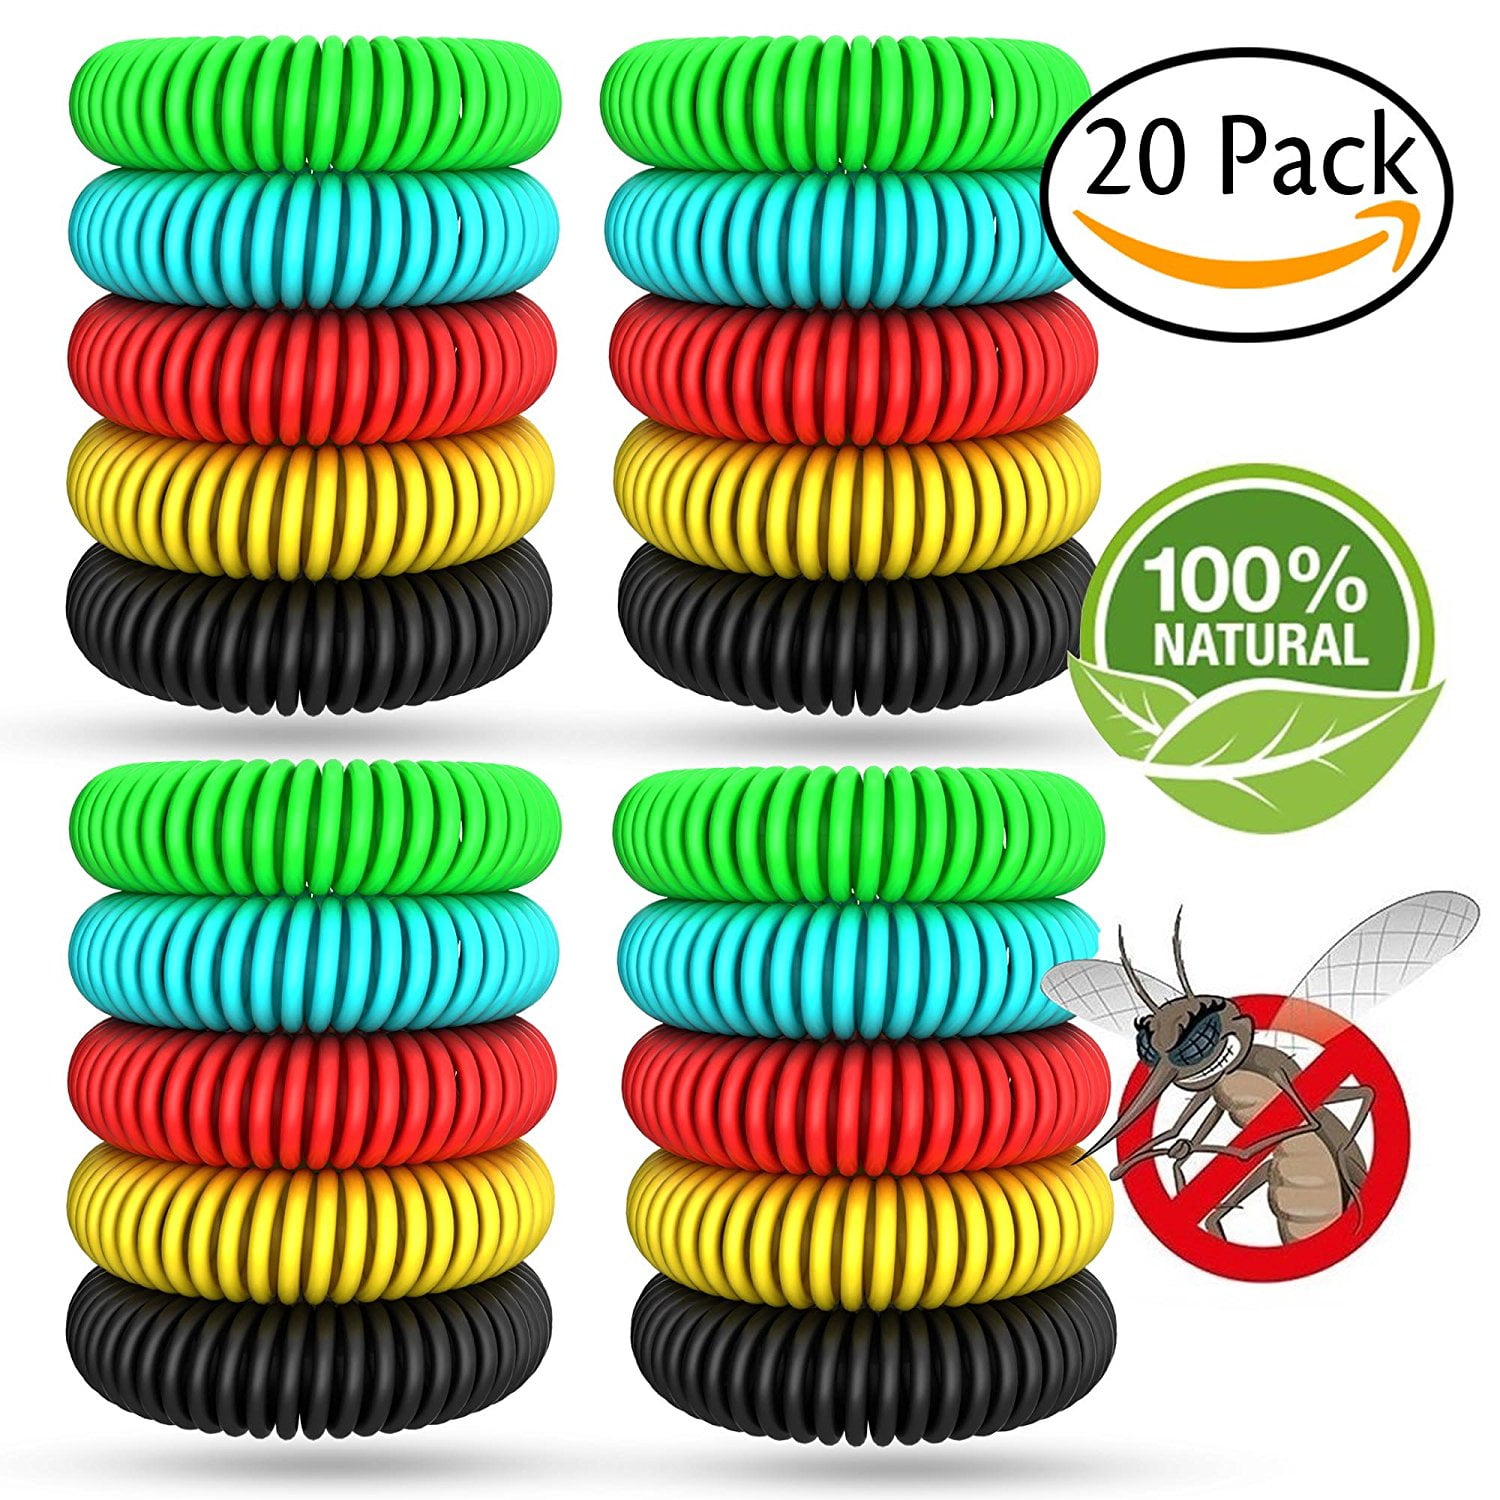 Mosquito Repellent Bracelet Insect Bands 30 Pack for Kids Adults All Natural Deet-free and 36 Pack Repellent Patches for Outdoor Travel Protection Free of Bug up to 300 Hours Waterproof